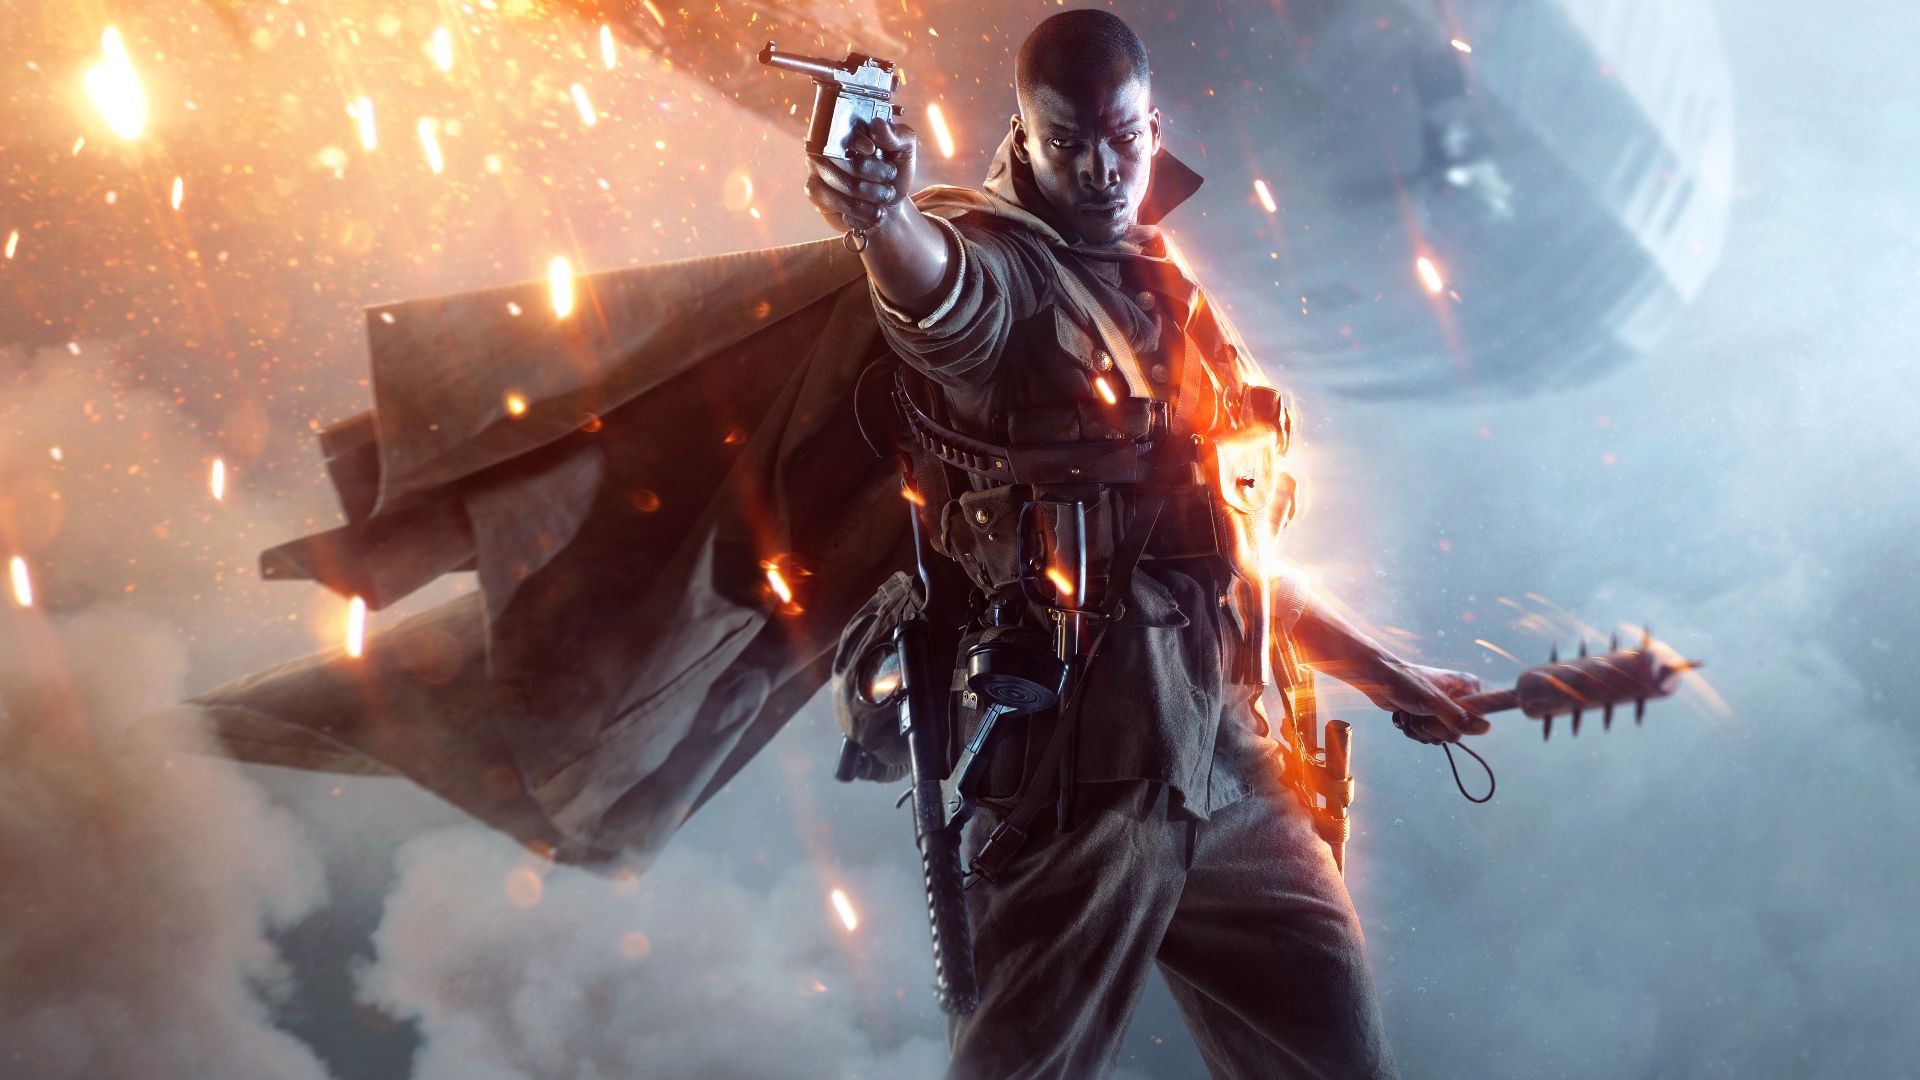 Battlefield V' Could Have a 'Battle Royale' Mode Similar to 'Fortnite' and  'PUBG